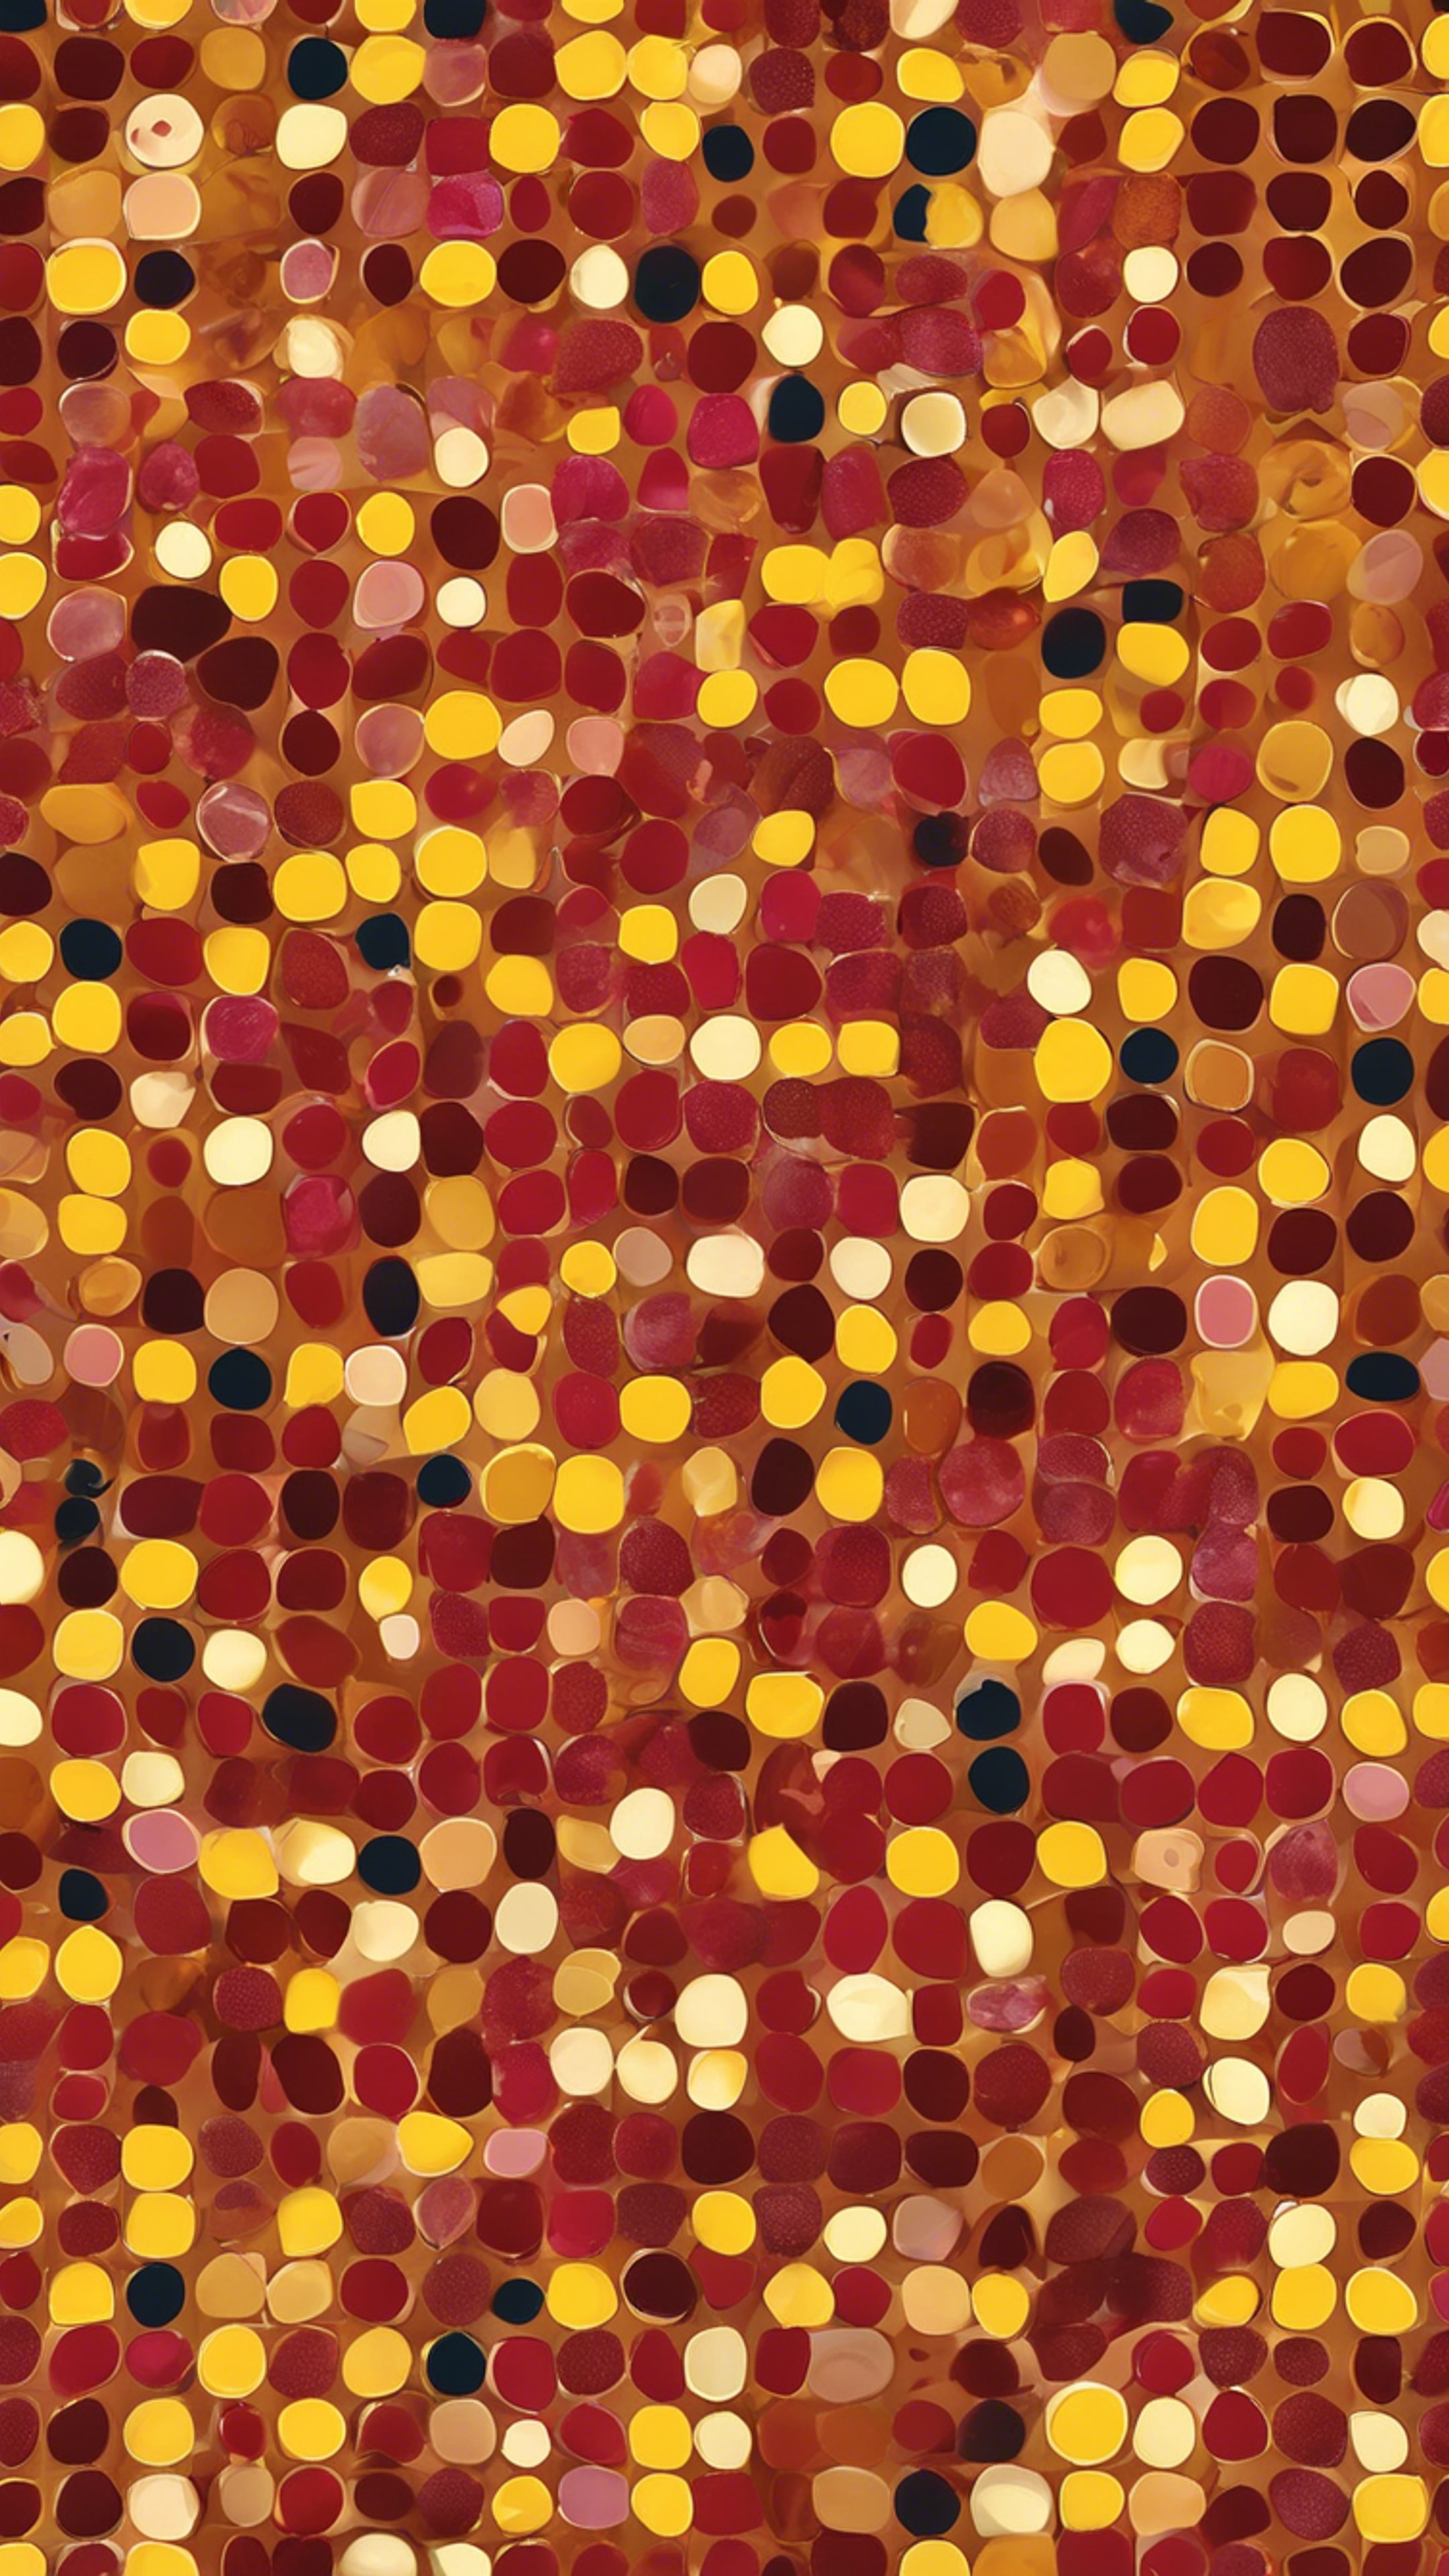 Vibrant pattern of polka dots, a mix of ruby red ones and mustard yellow ones. Hintergrund[8e468345fc0d4ef4ba5a]